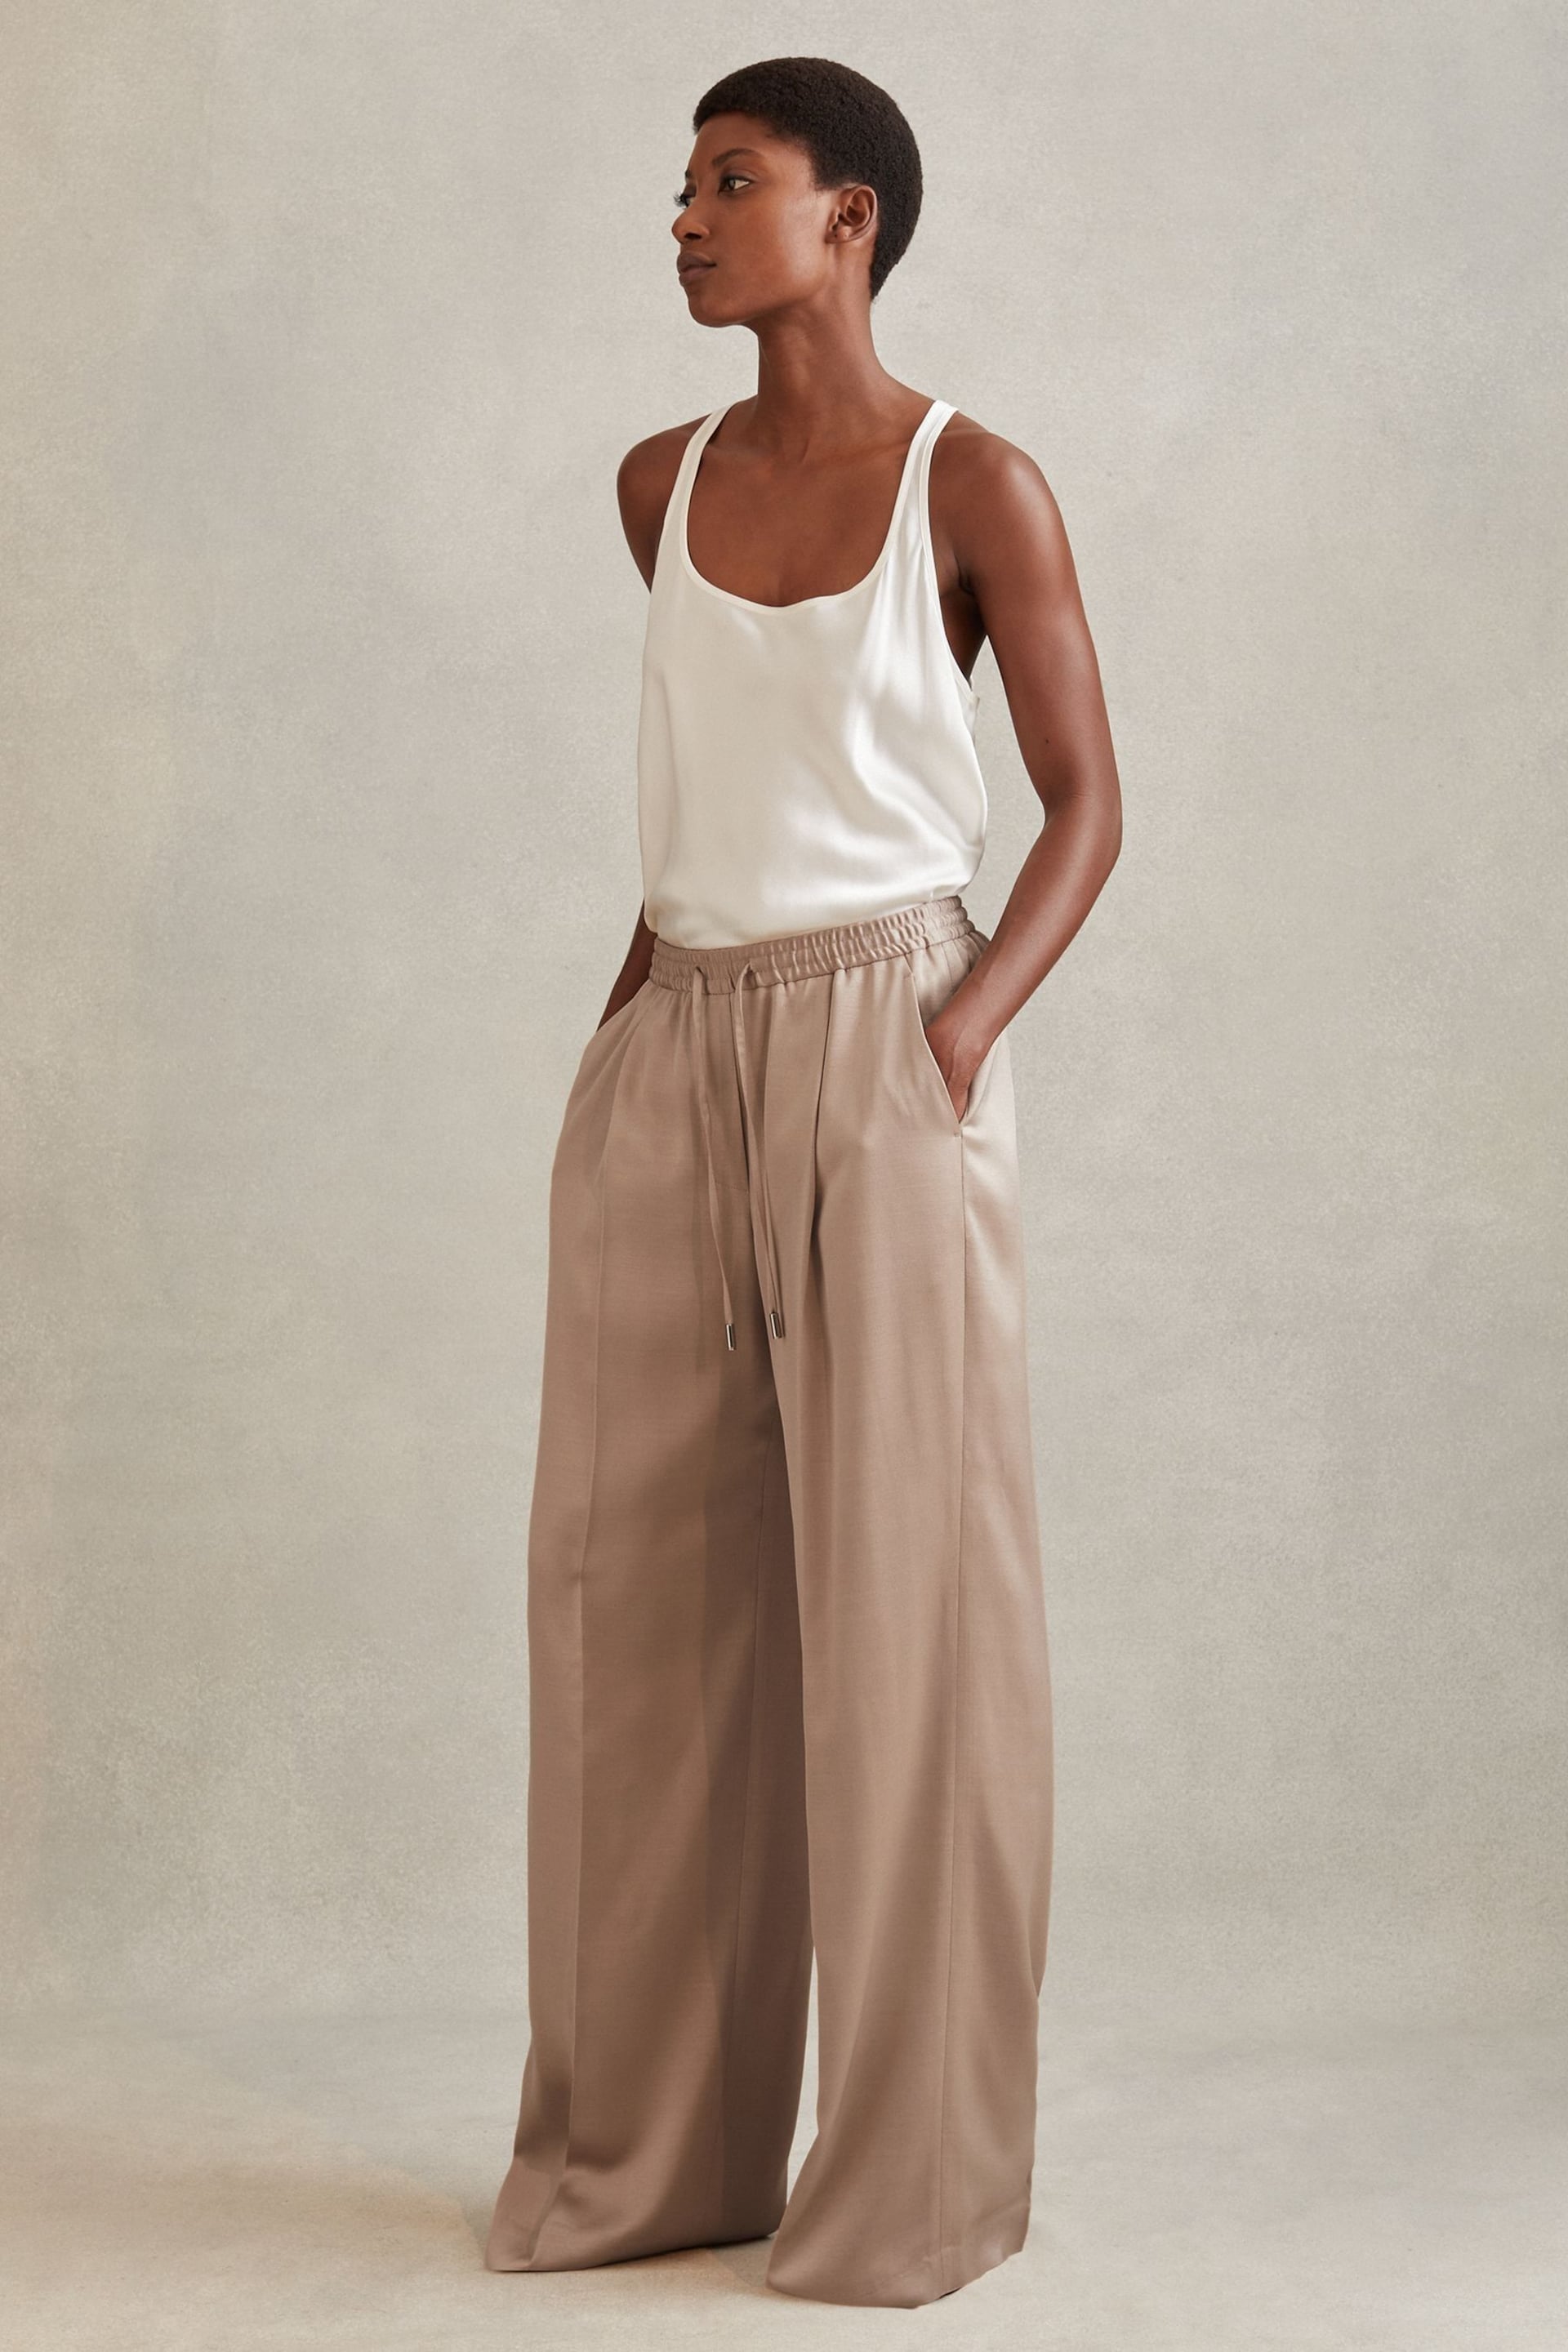 Reiss Gold Cole Satin Drawstring Wide Leg Trousers - Image 1 of 5